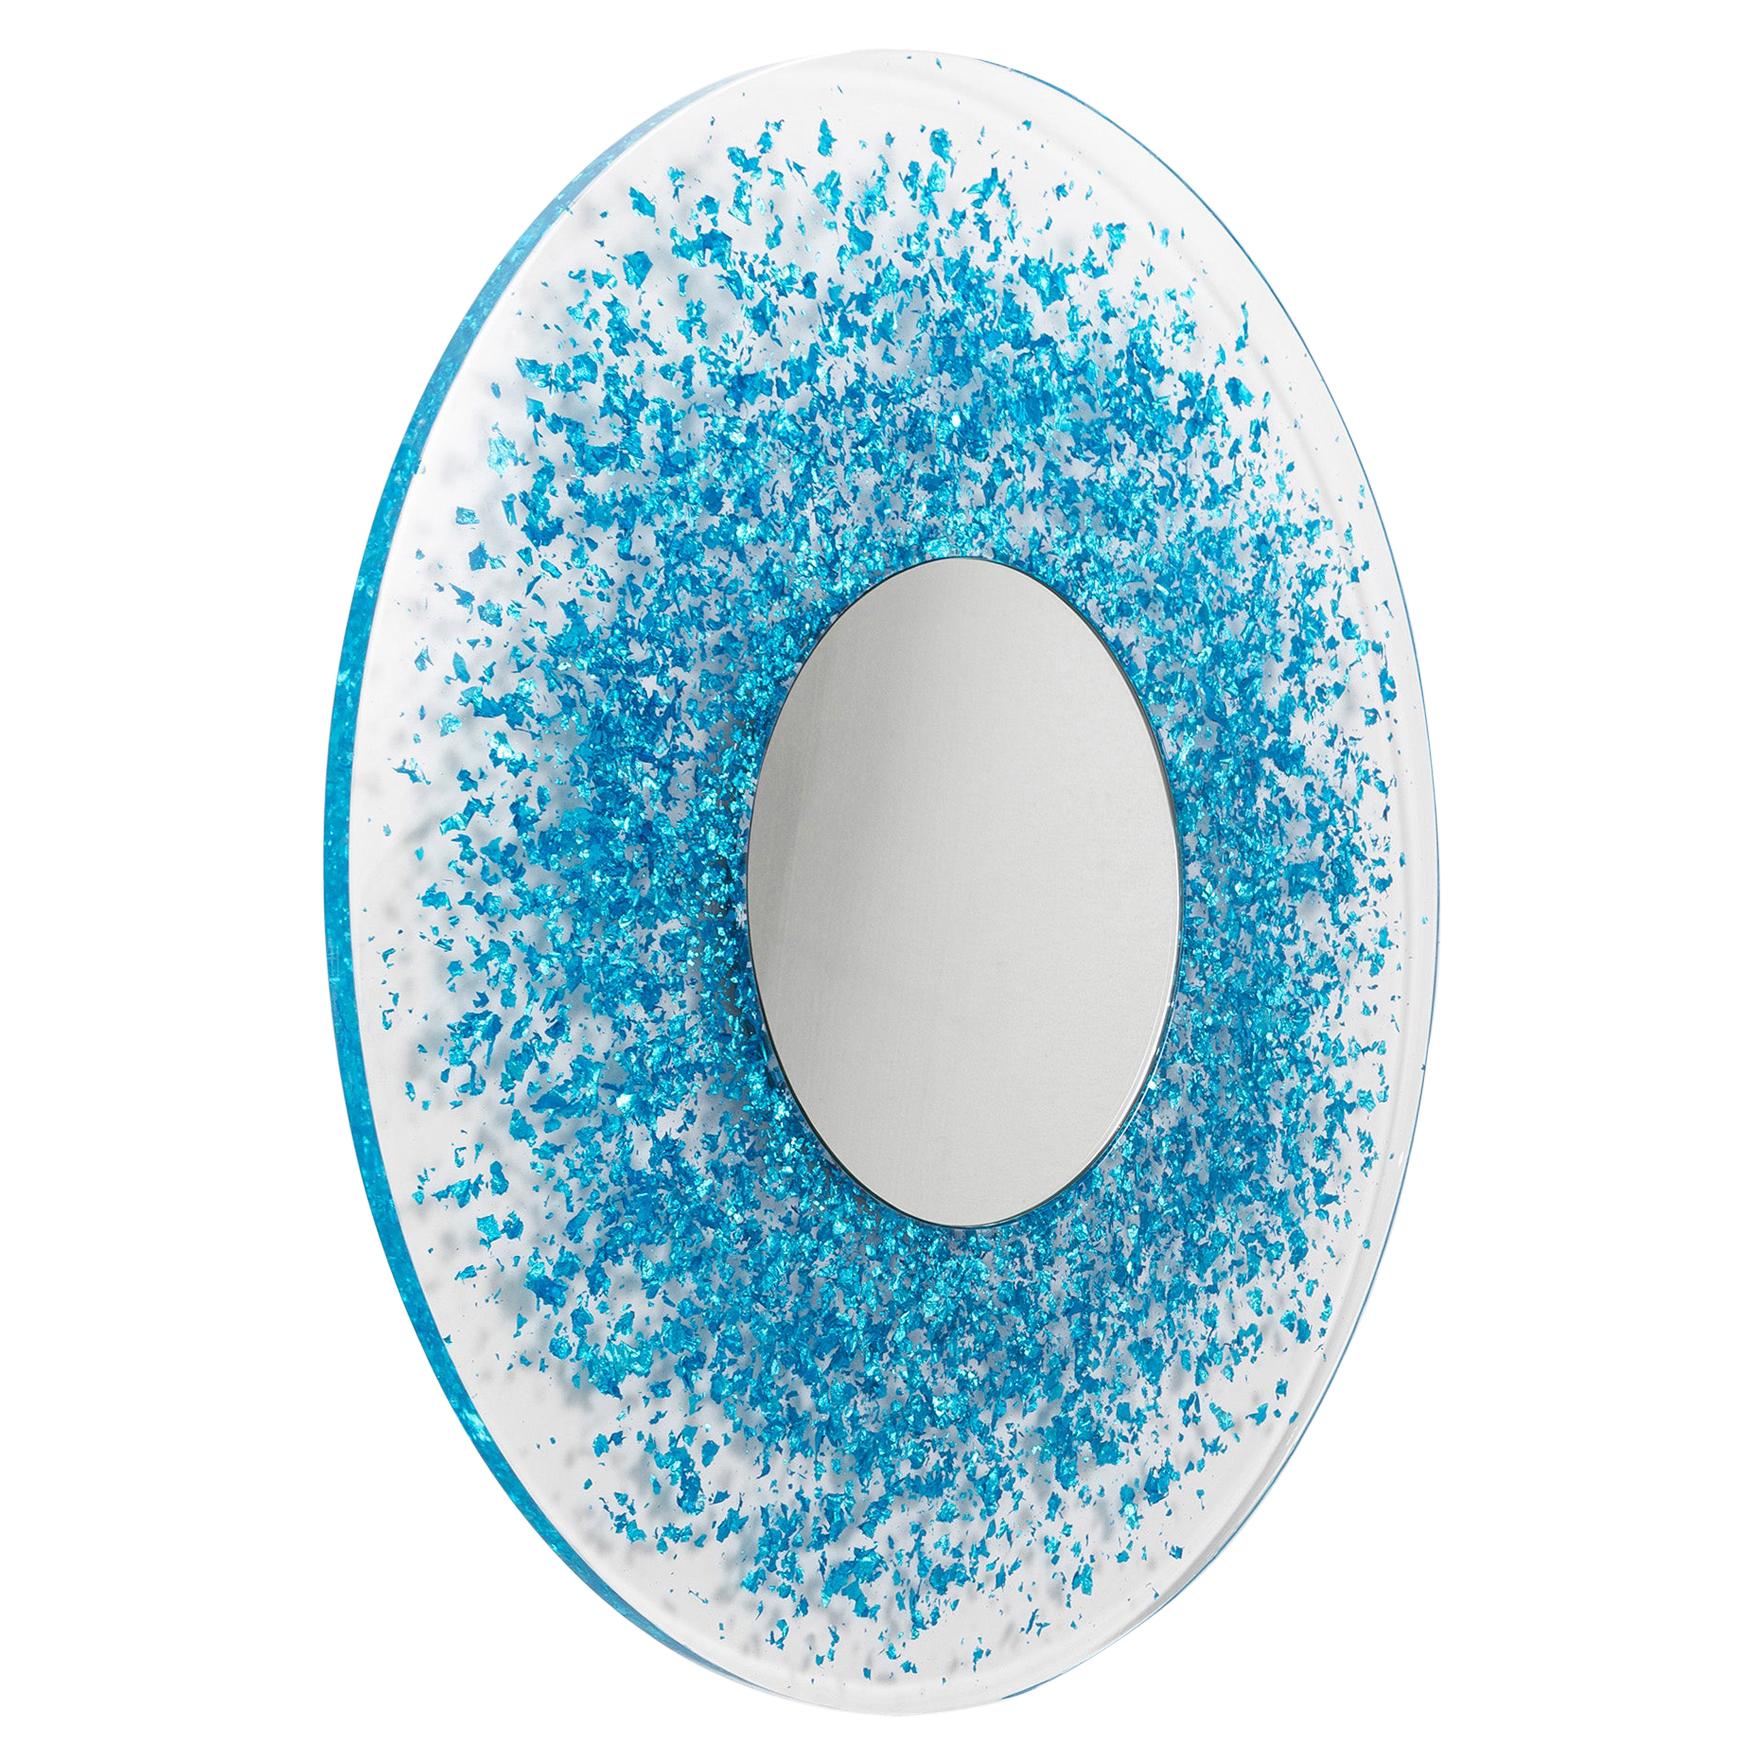 Sunburst Mirror in Electric Blue Colored Silver Leaf & Resin by Jake Phipps For Sale